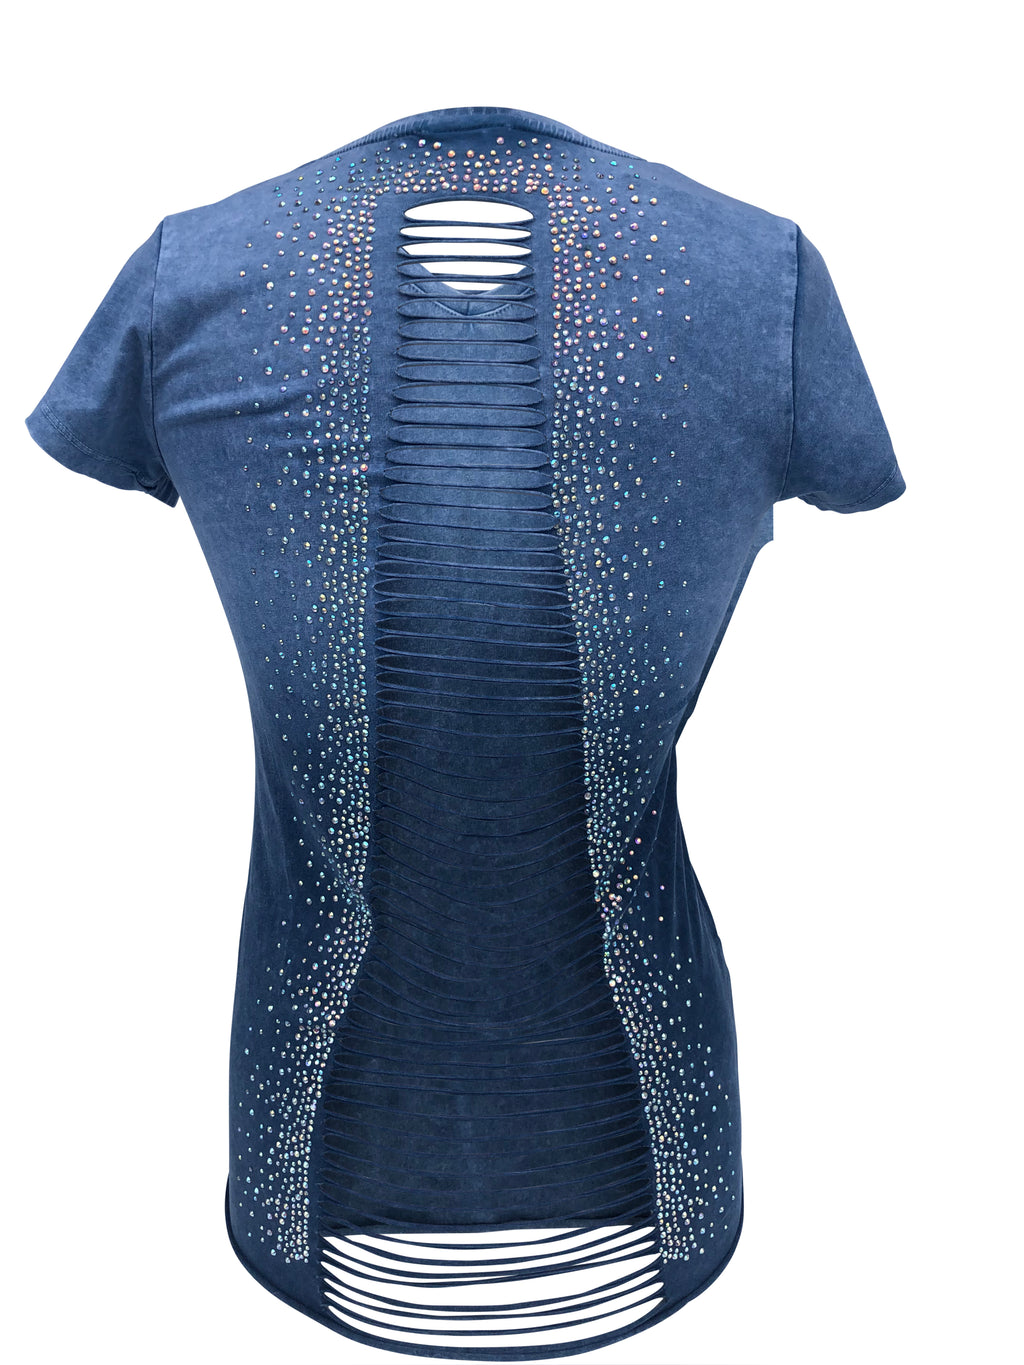 Women's Blue Ombre Open Back with Rhinestones Shirt